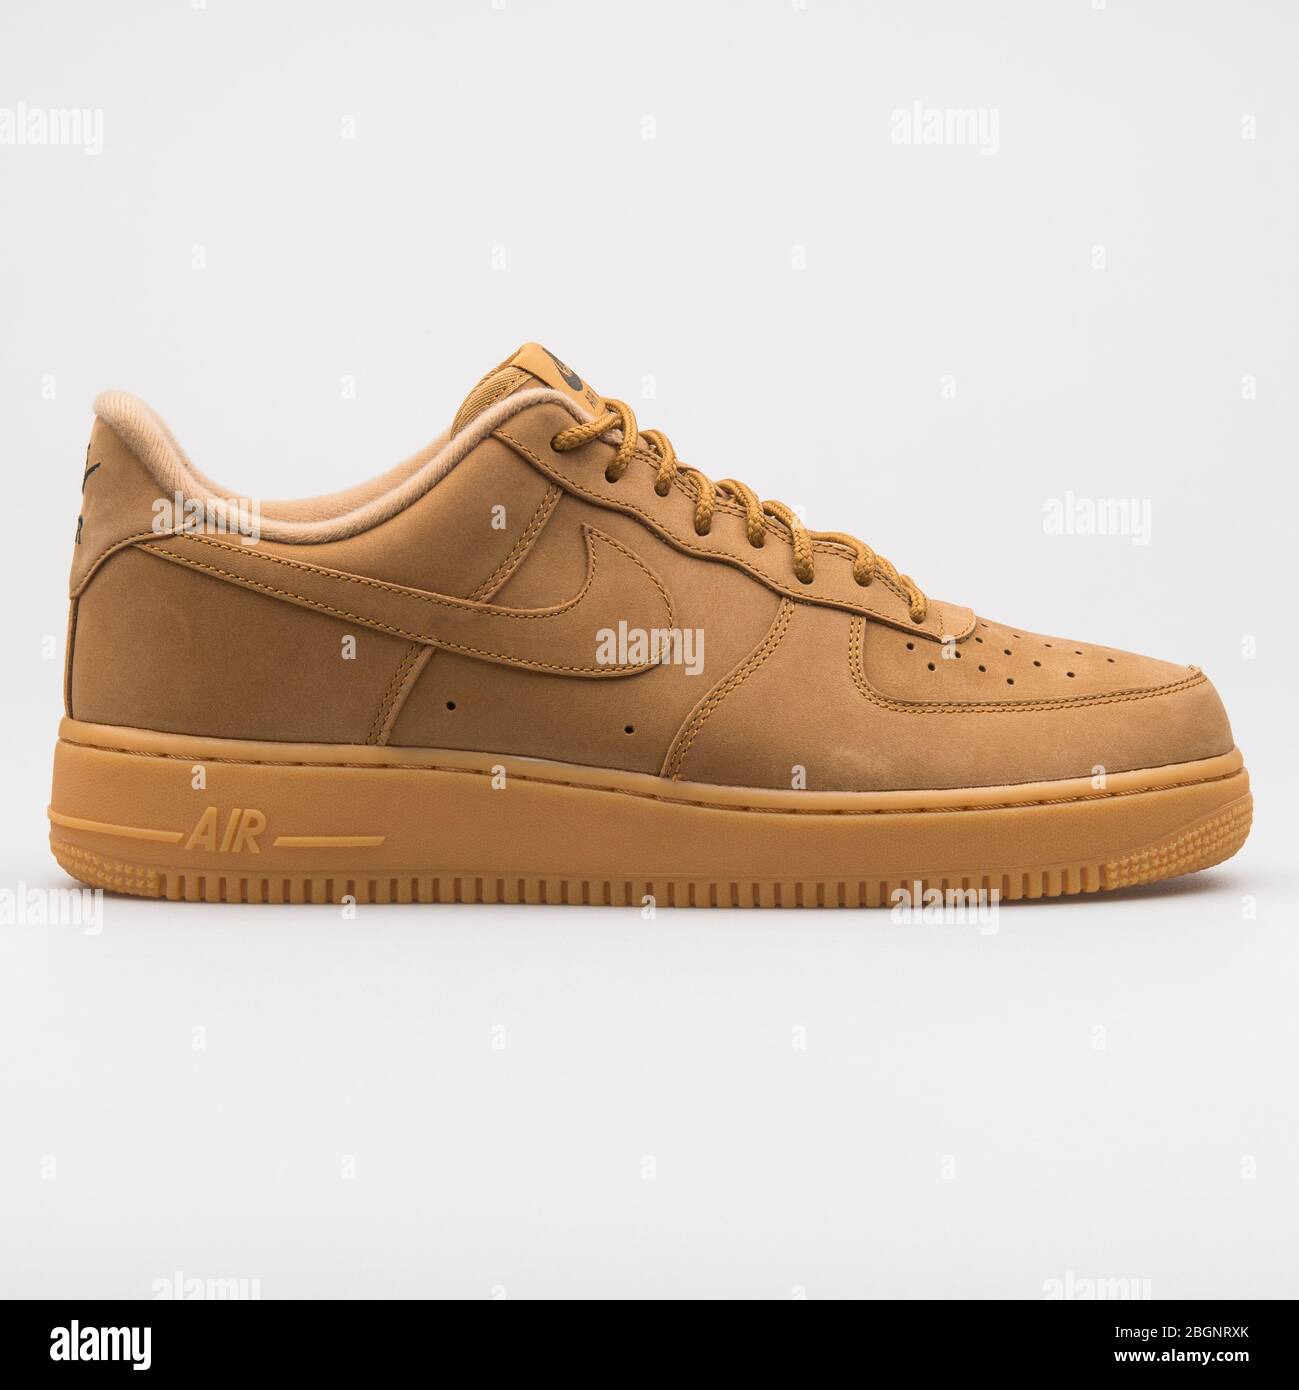 VIENNA, AUSTRIA - AUGUST 24, 2017: Nike Air Force 1 07 WB light brown  sneaker on white background Stock Photo - Alamy